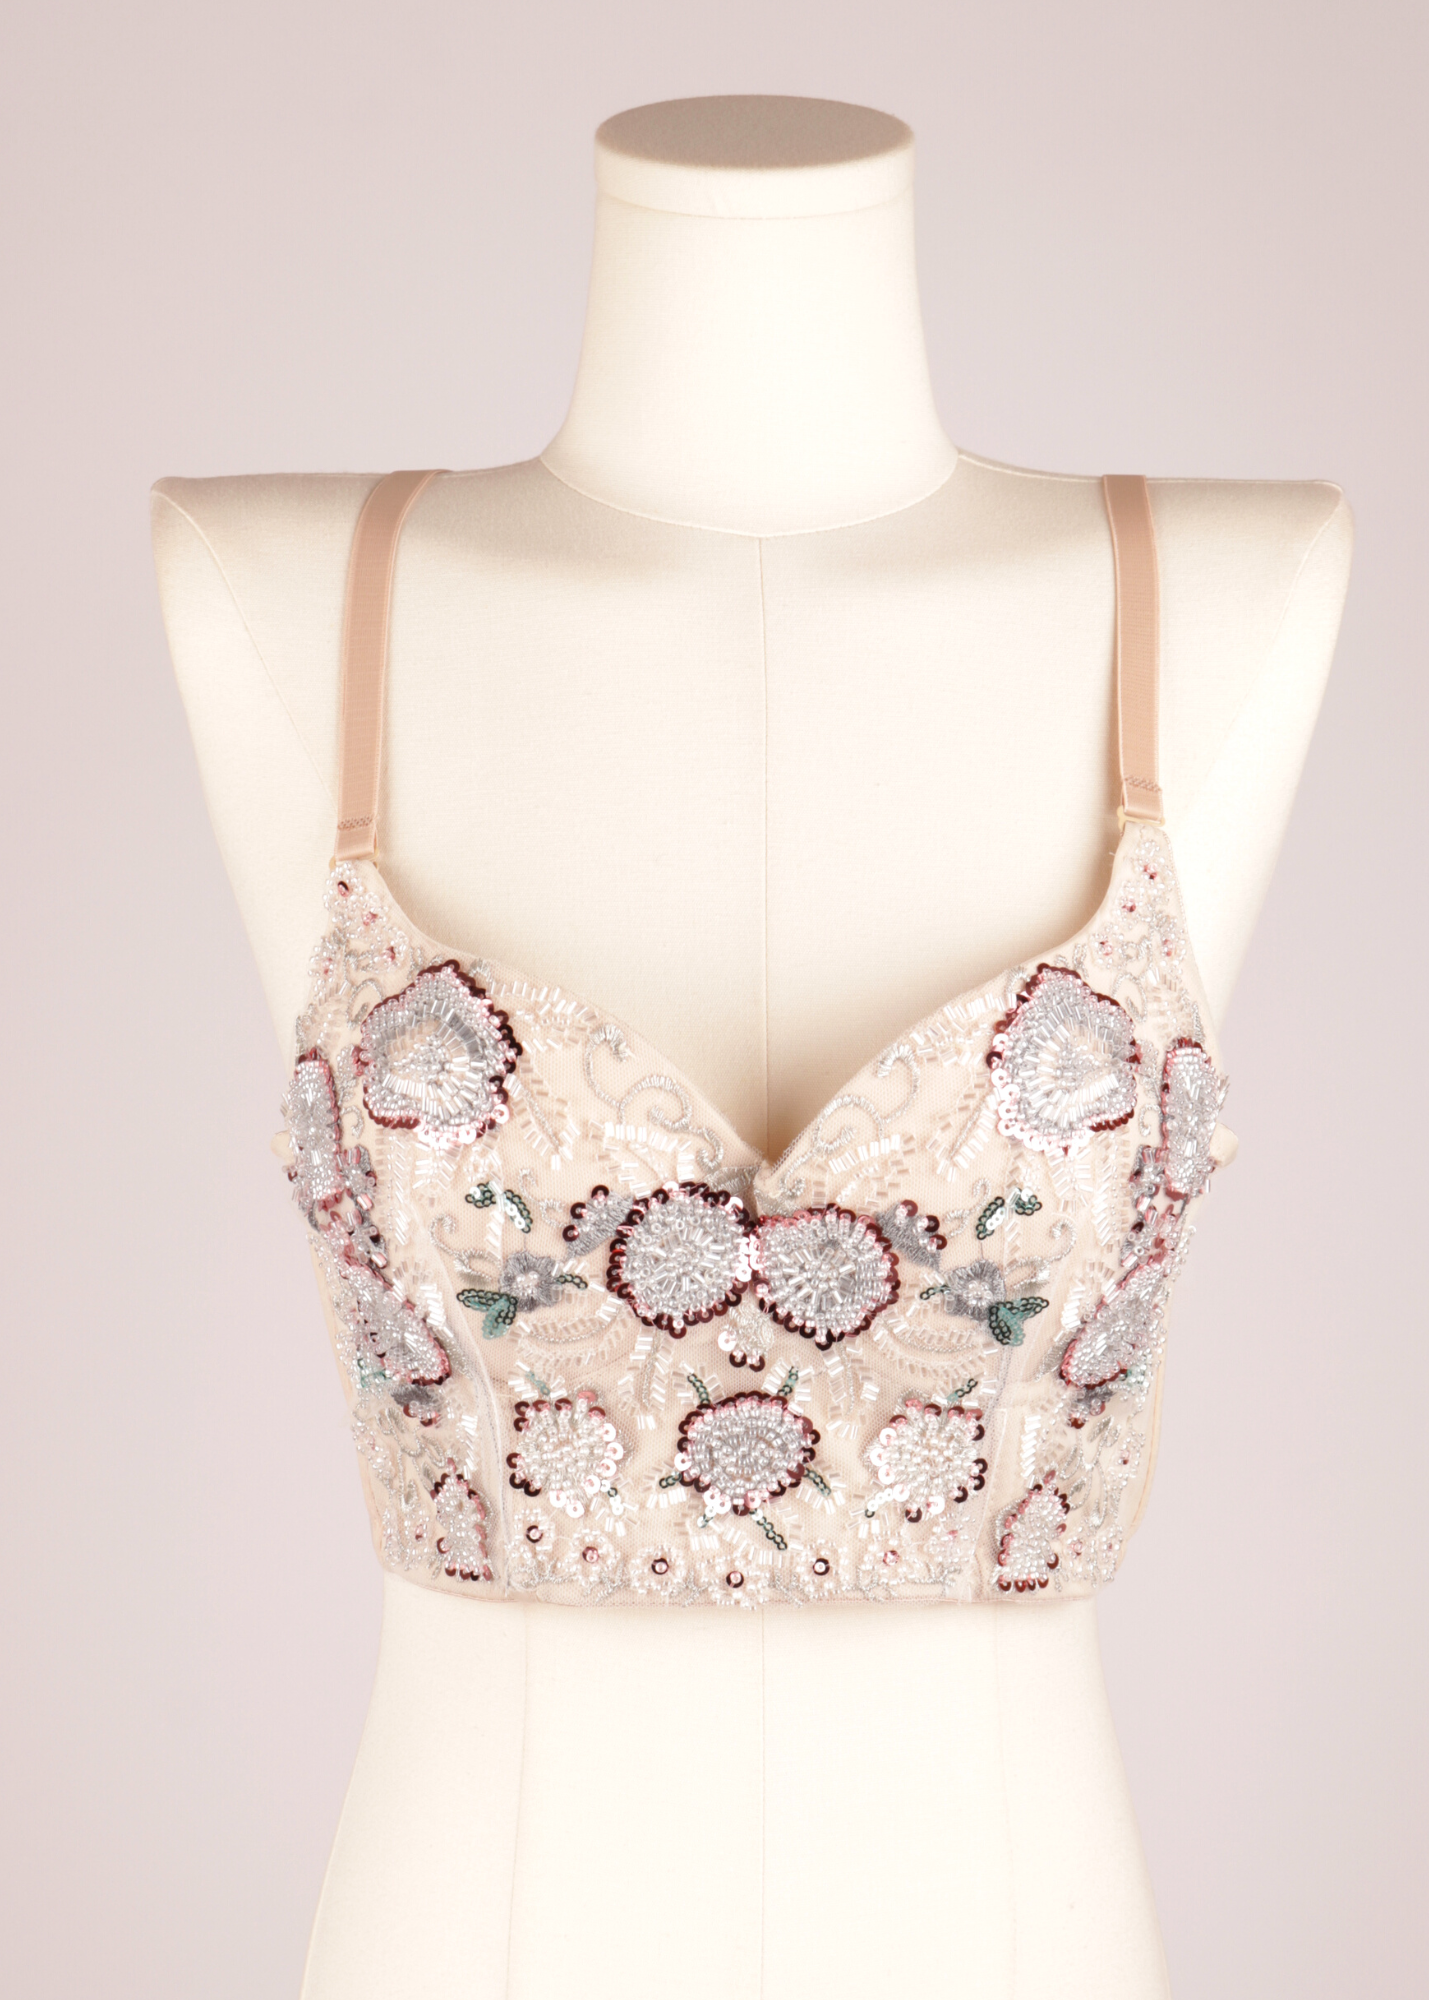 TOP BRALETTE CANDY